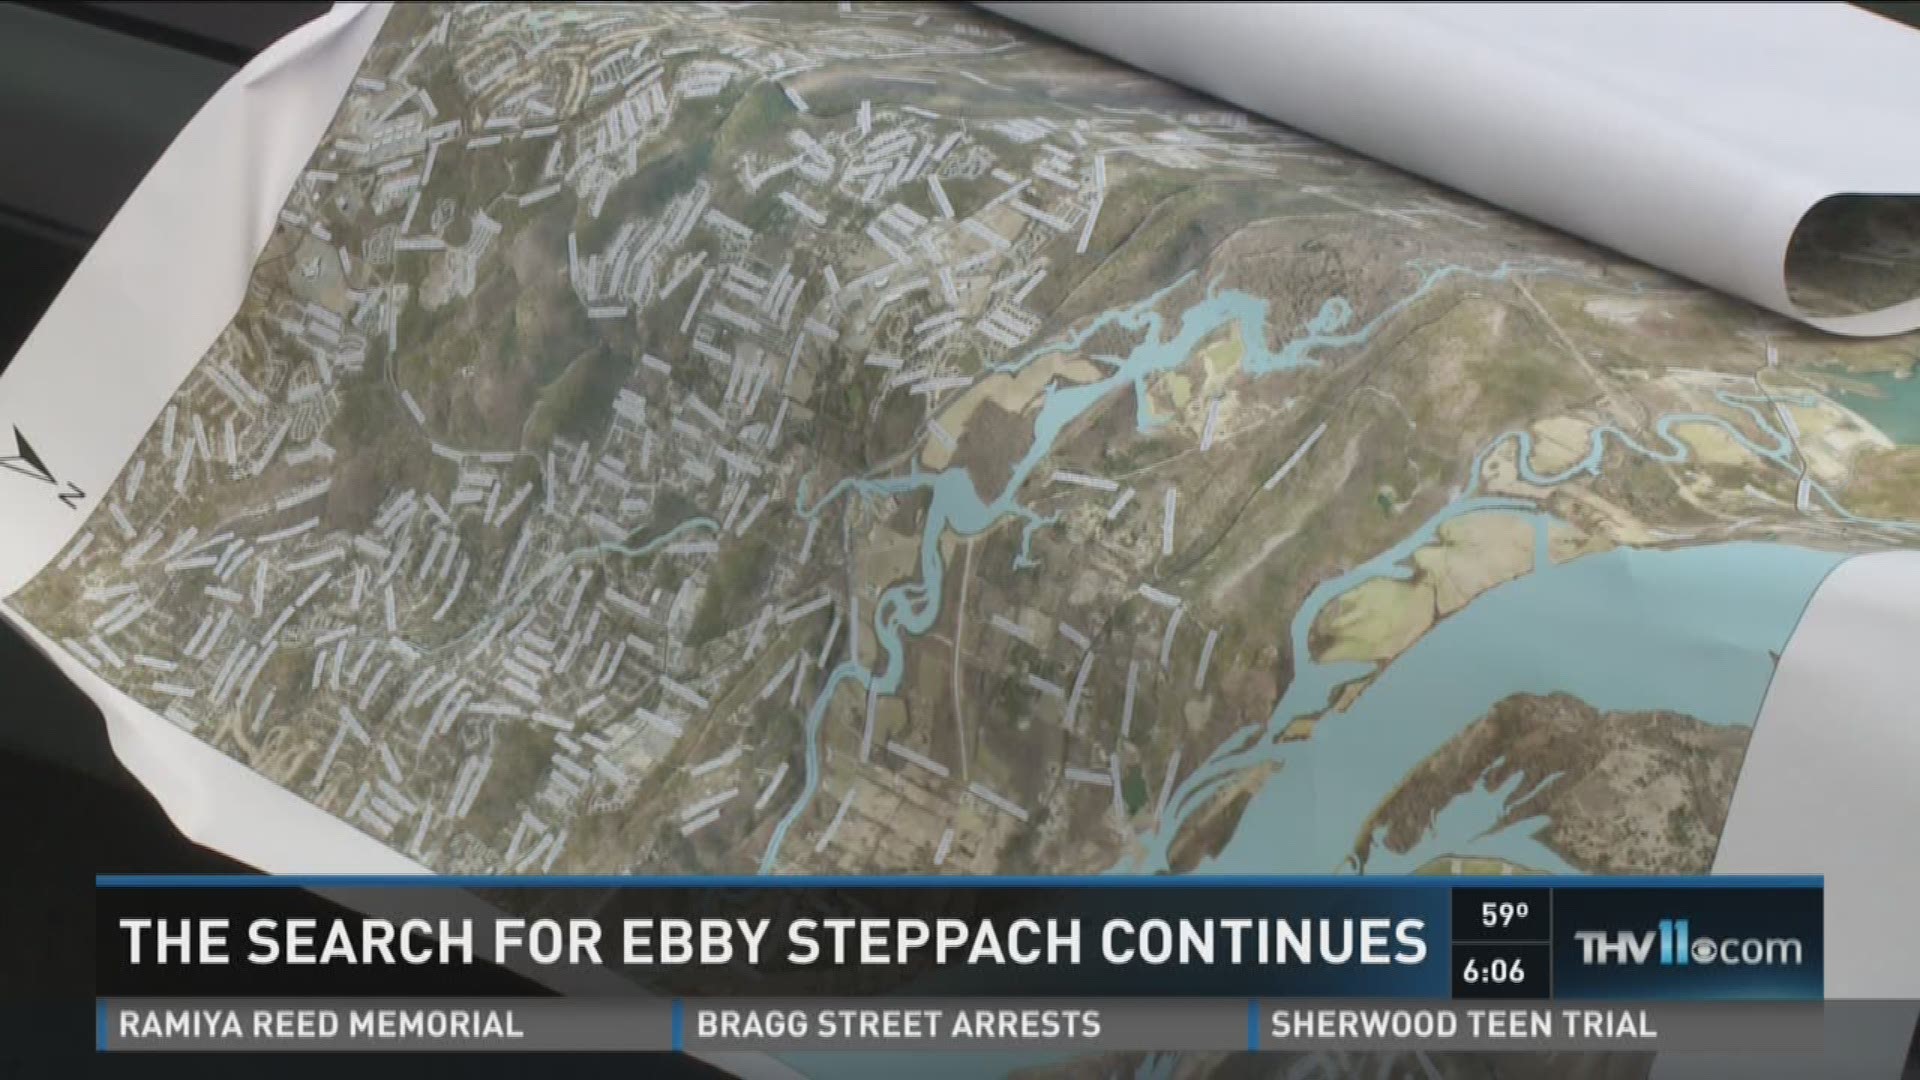 The search for Ebby Steppach continues